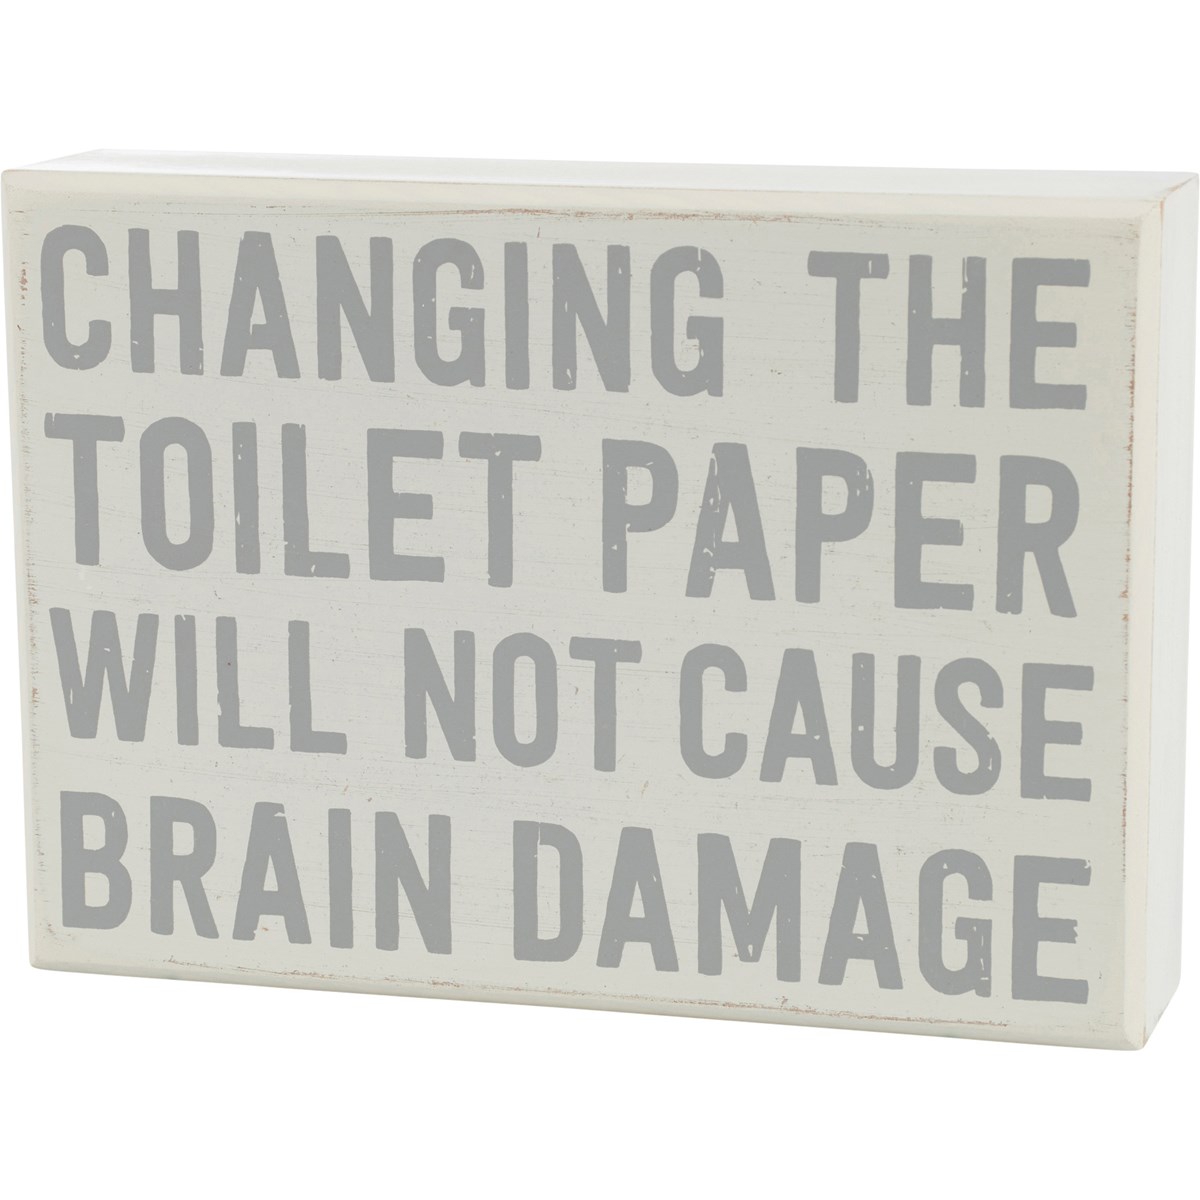 Toilet Paper Box Sign And Towel Set - Wood, Cotton